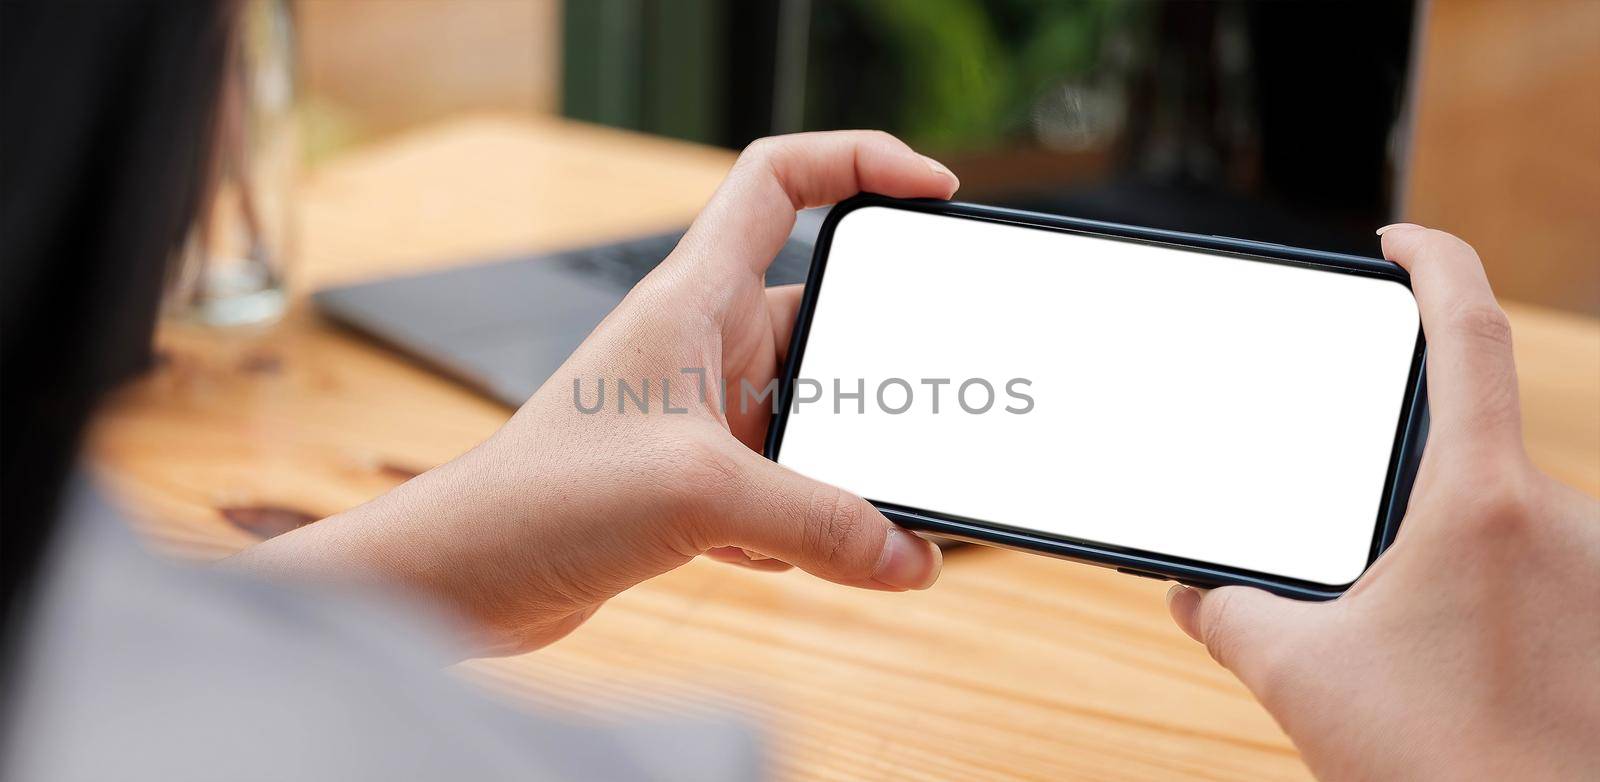 Mockup image woman hand holding texting using black mobile,cell phone with copy space,white blank screen for text.concept for contact business,people communication,technology electronic device by wichayada